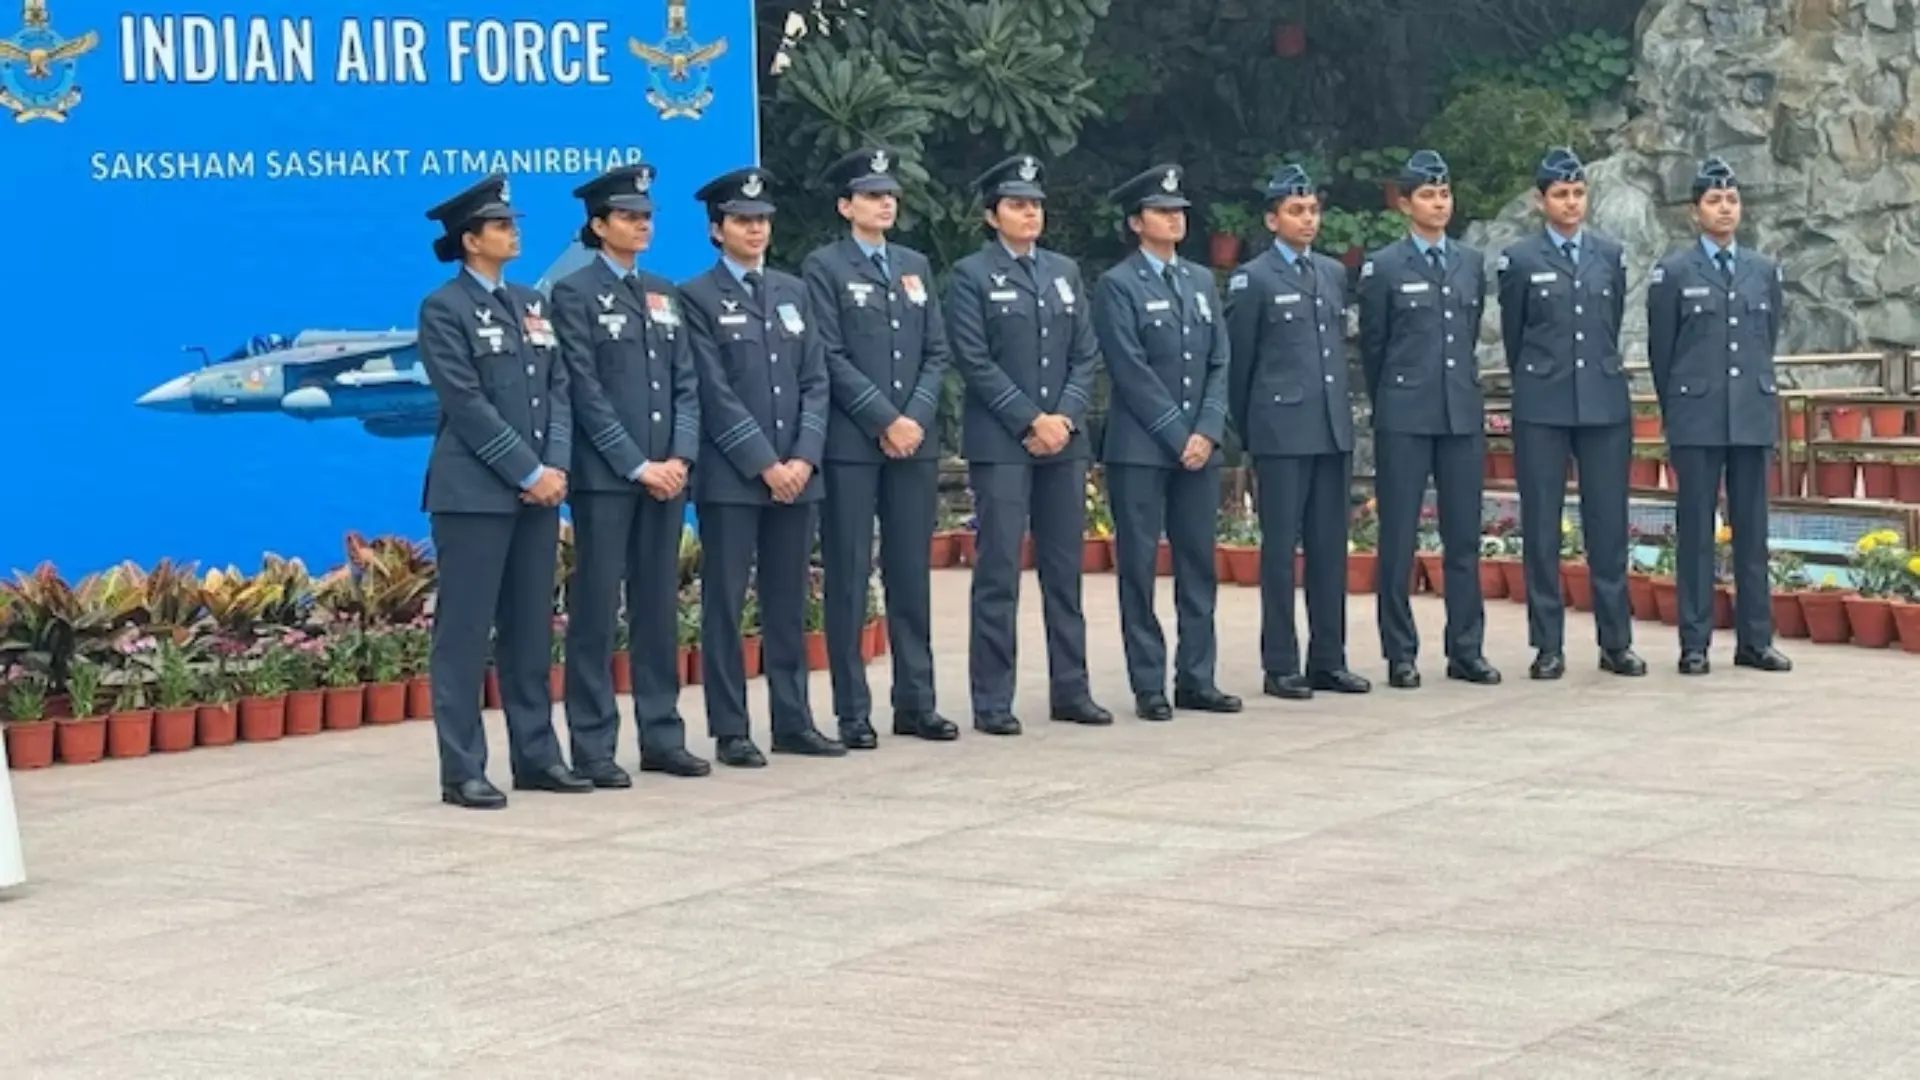 Women Empowerment Takes Flight in IAF Republic Day Parade